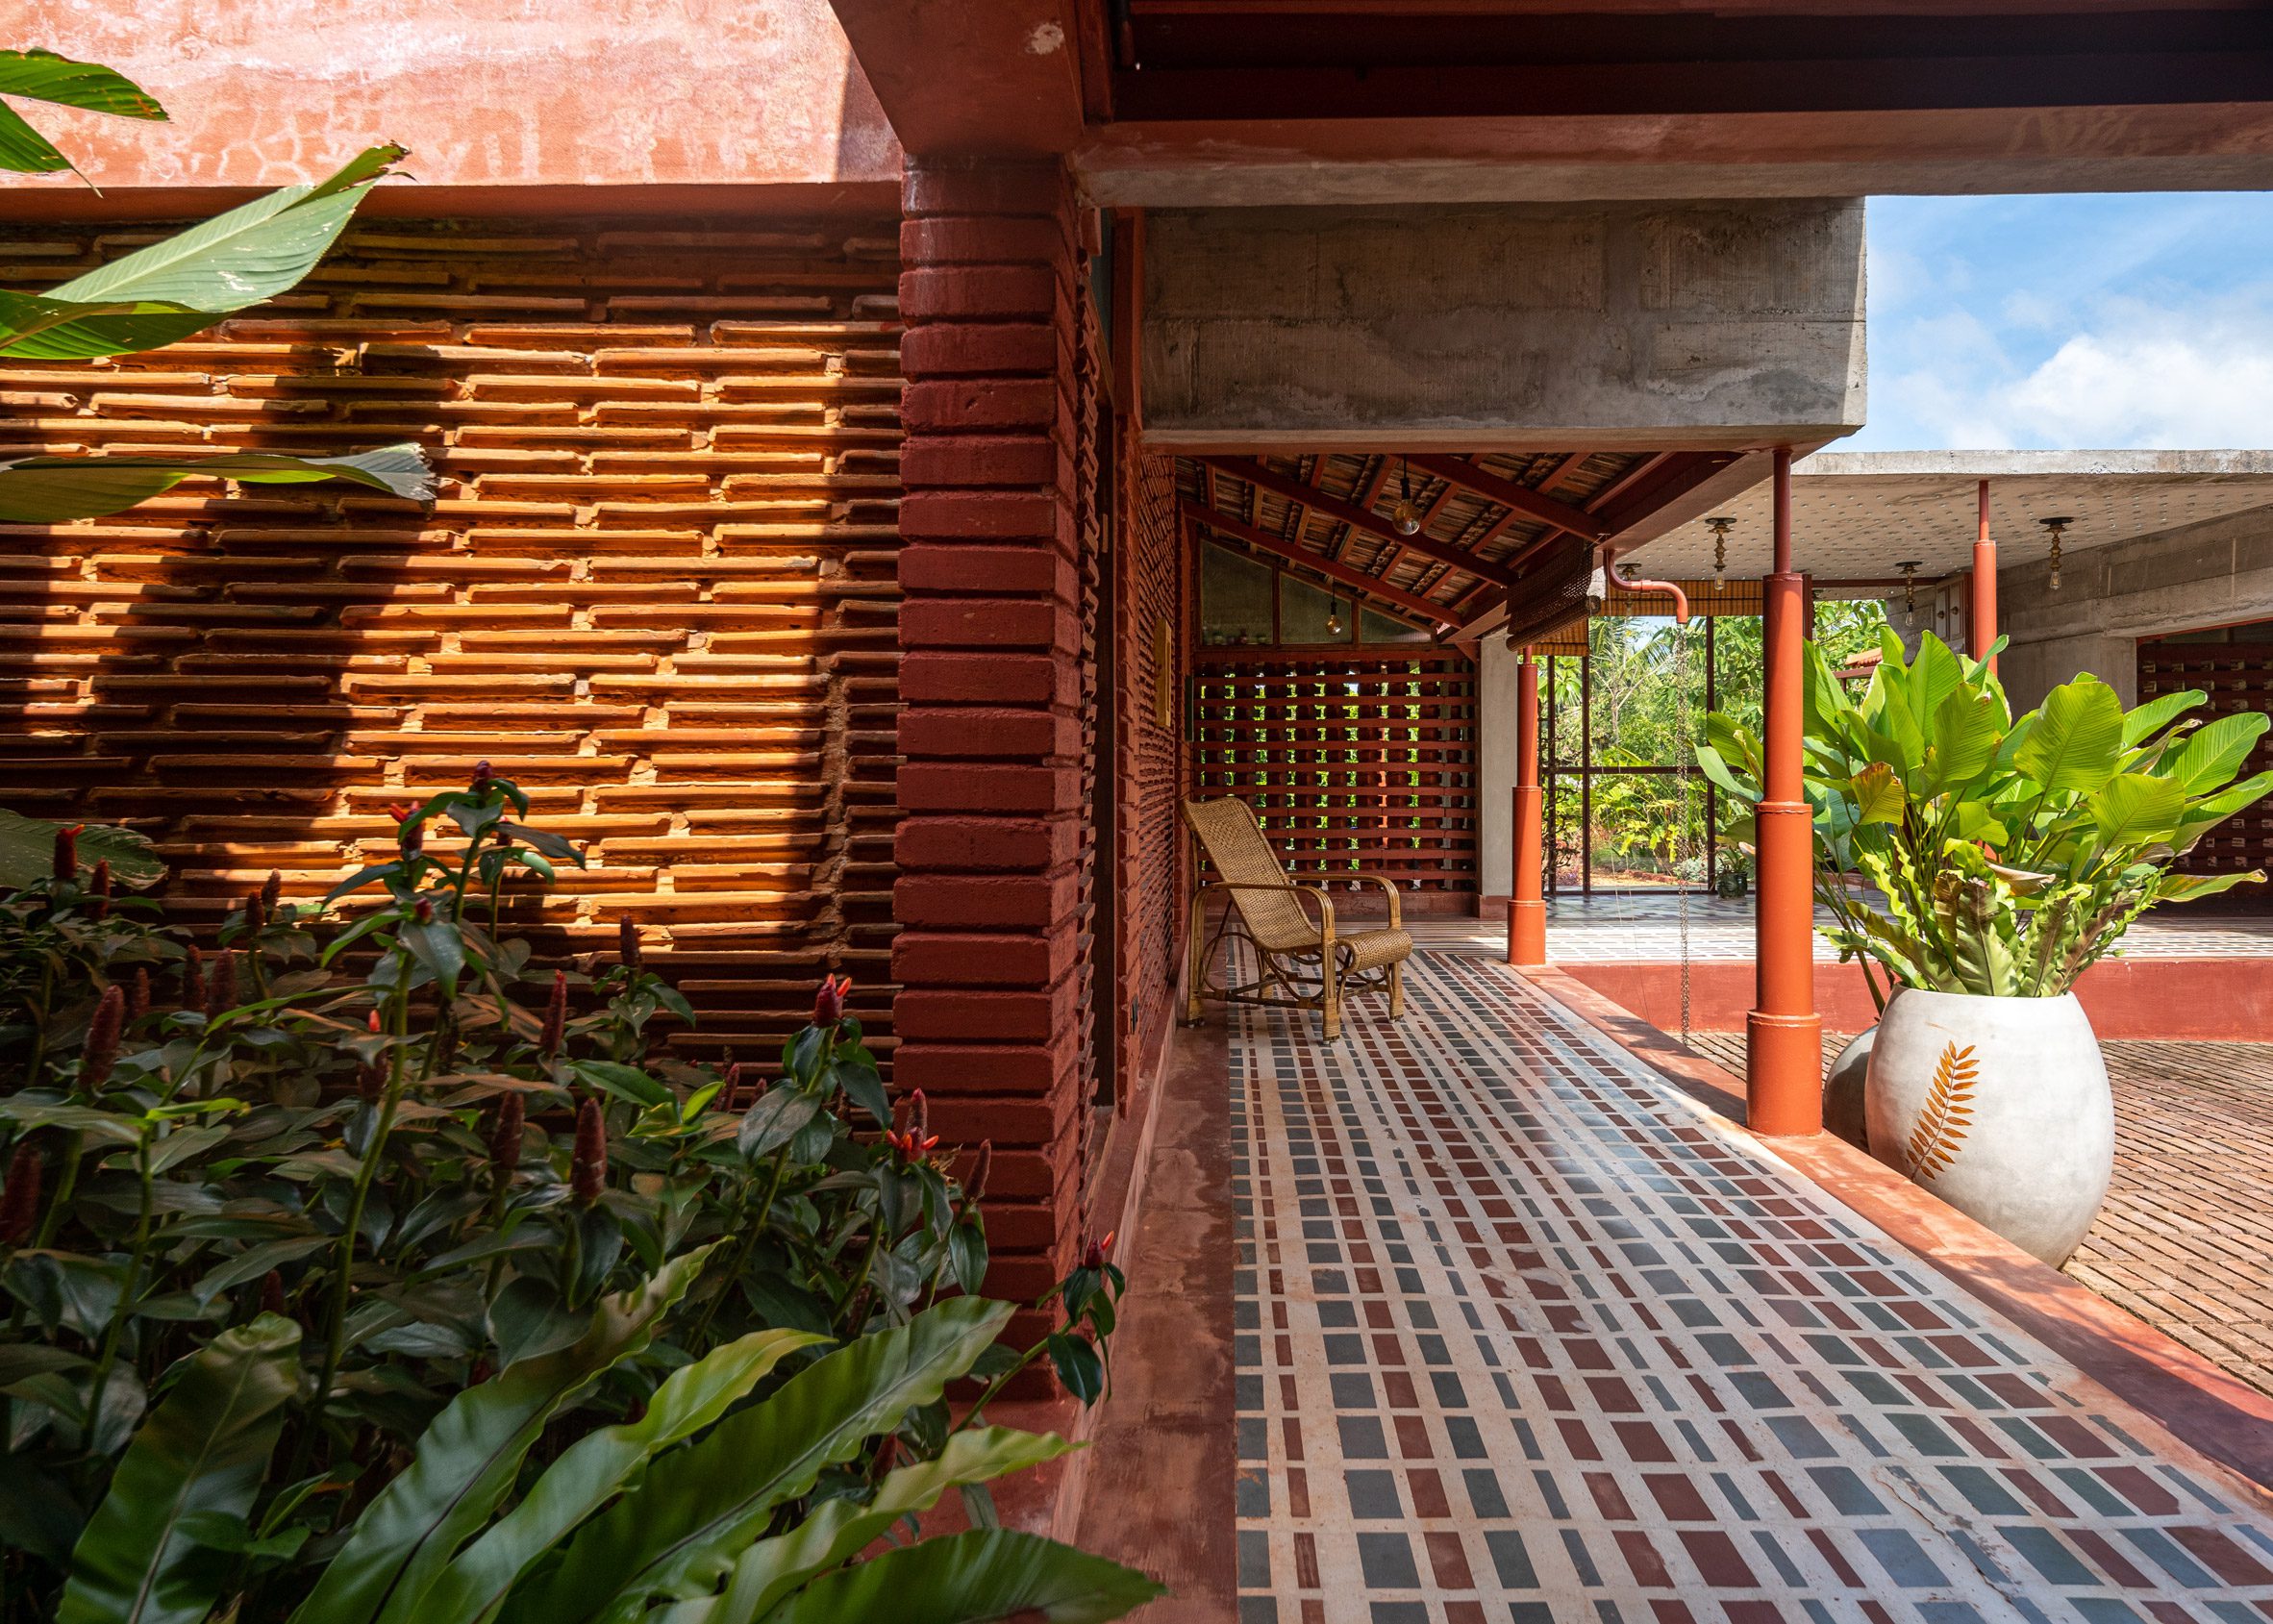 Walls made from deep red brick, stacked mangalore tiles